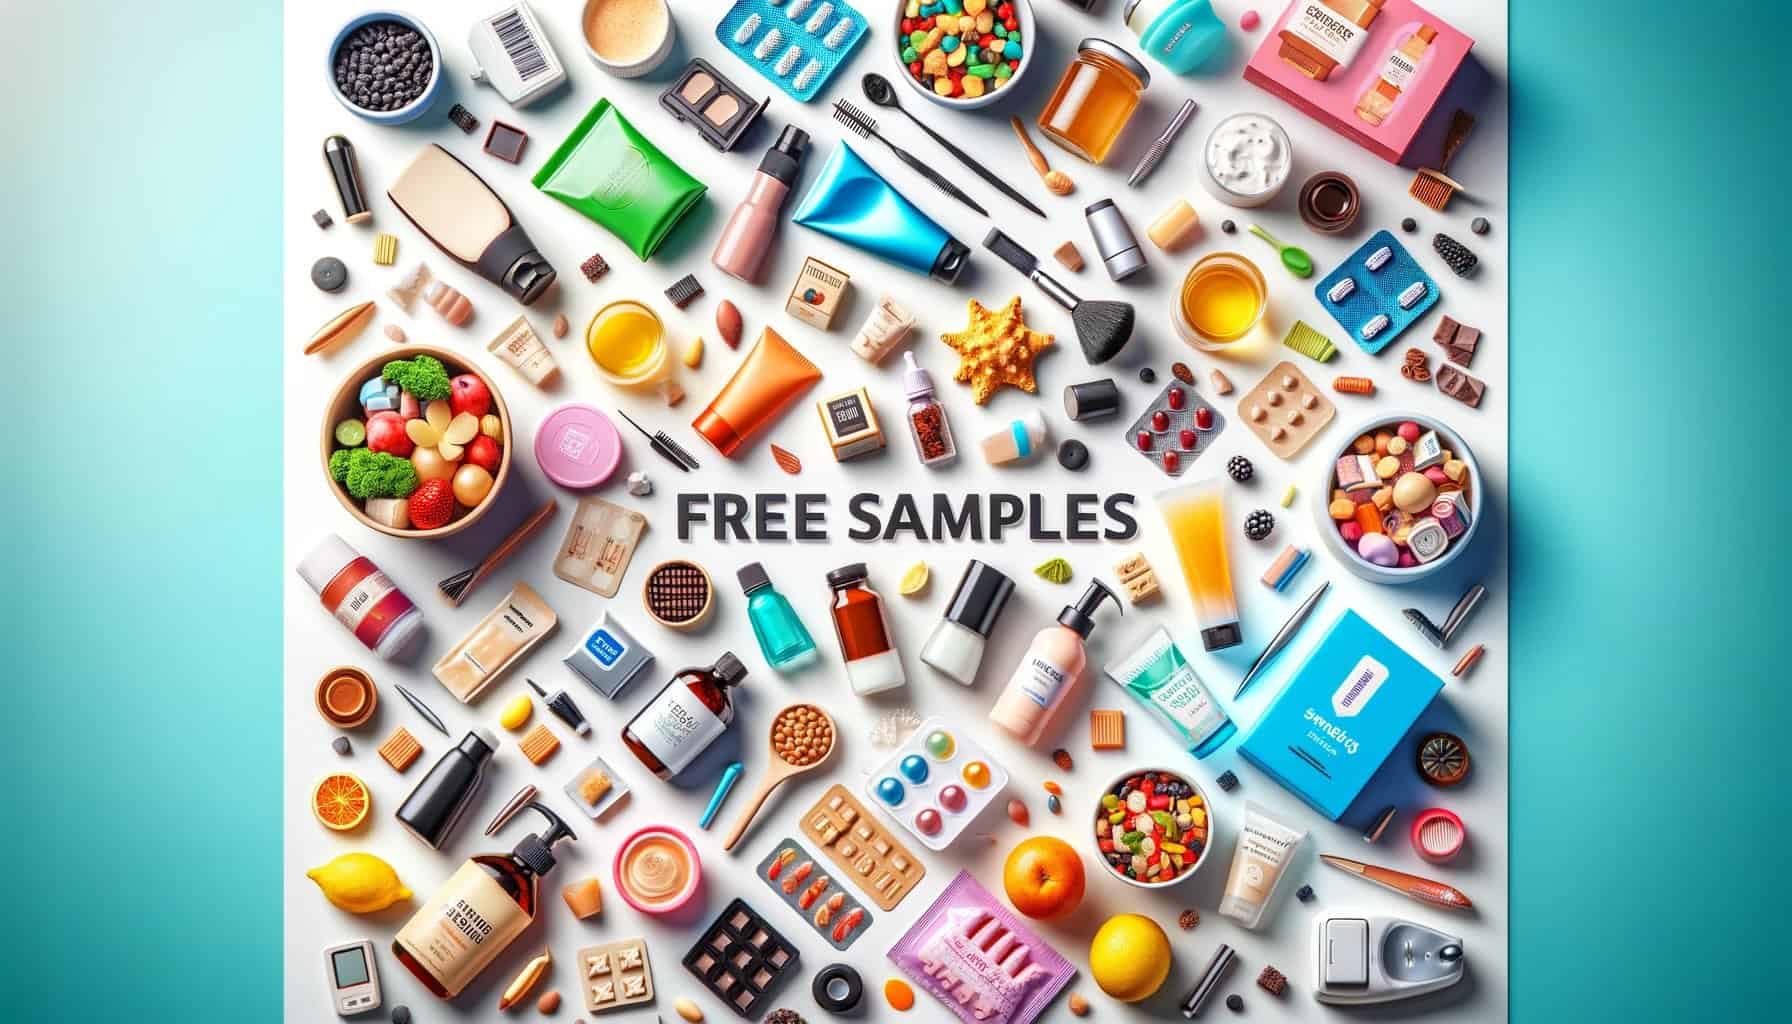 Free stuff and samples